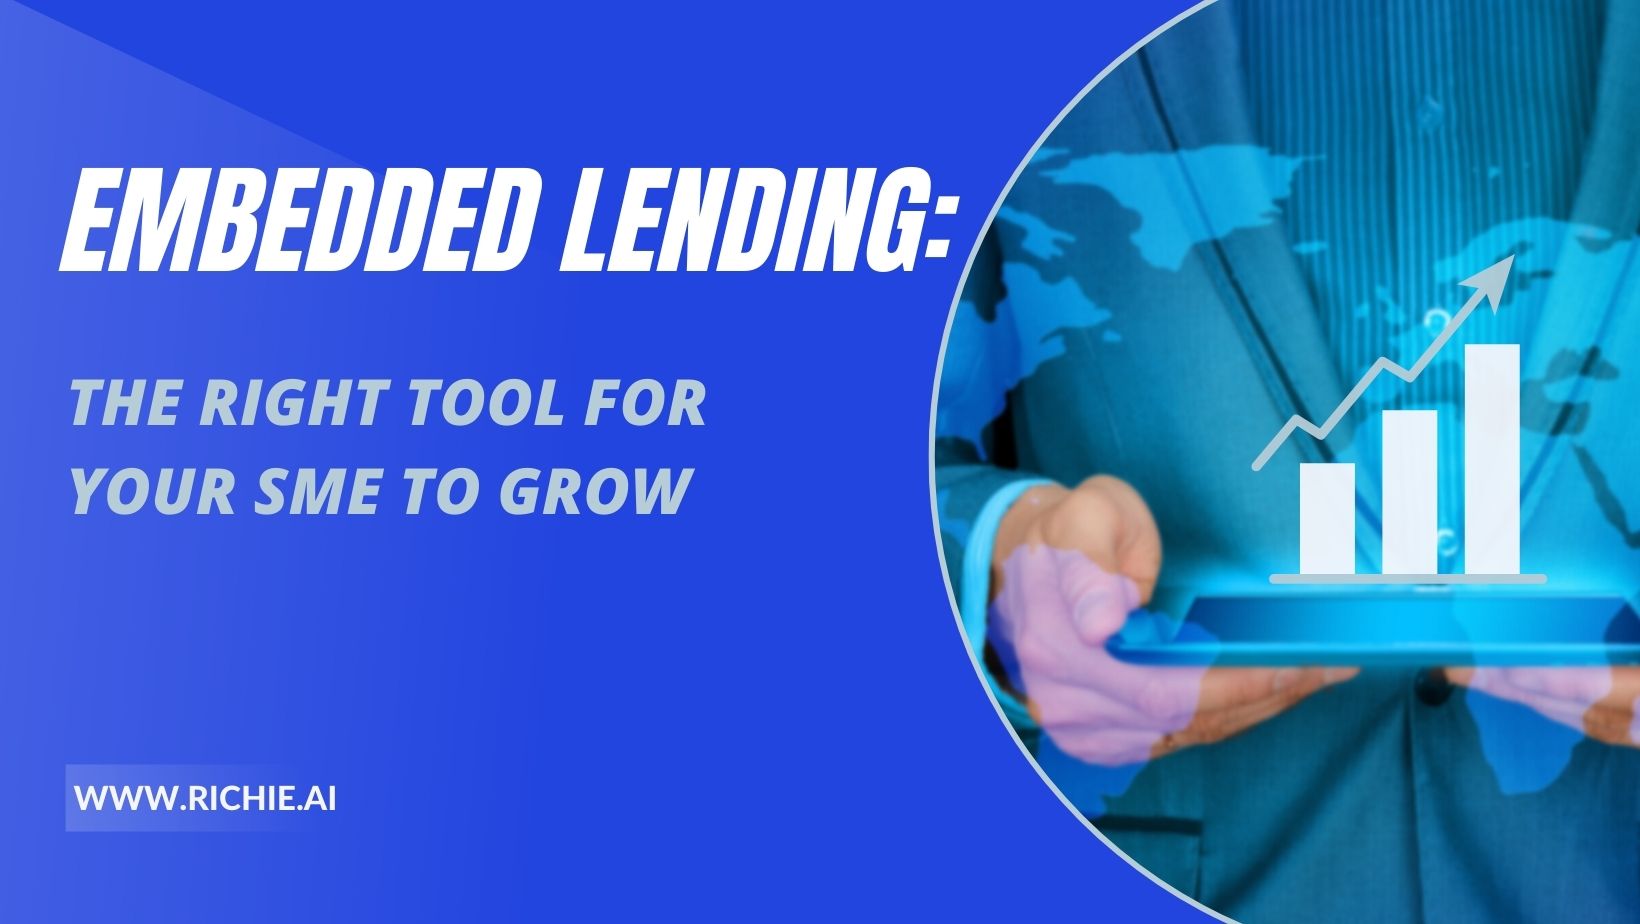 Embedded Lending: The Right Tool for Your SME to Grow